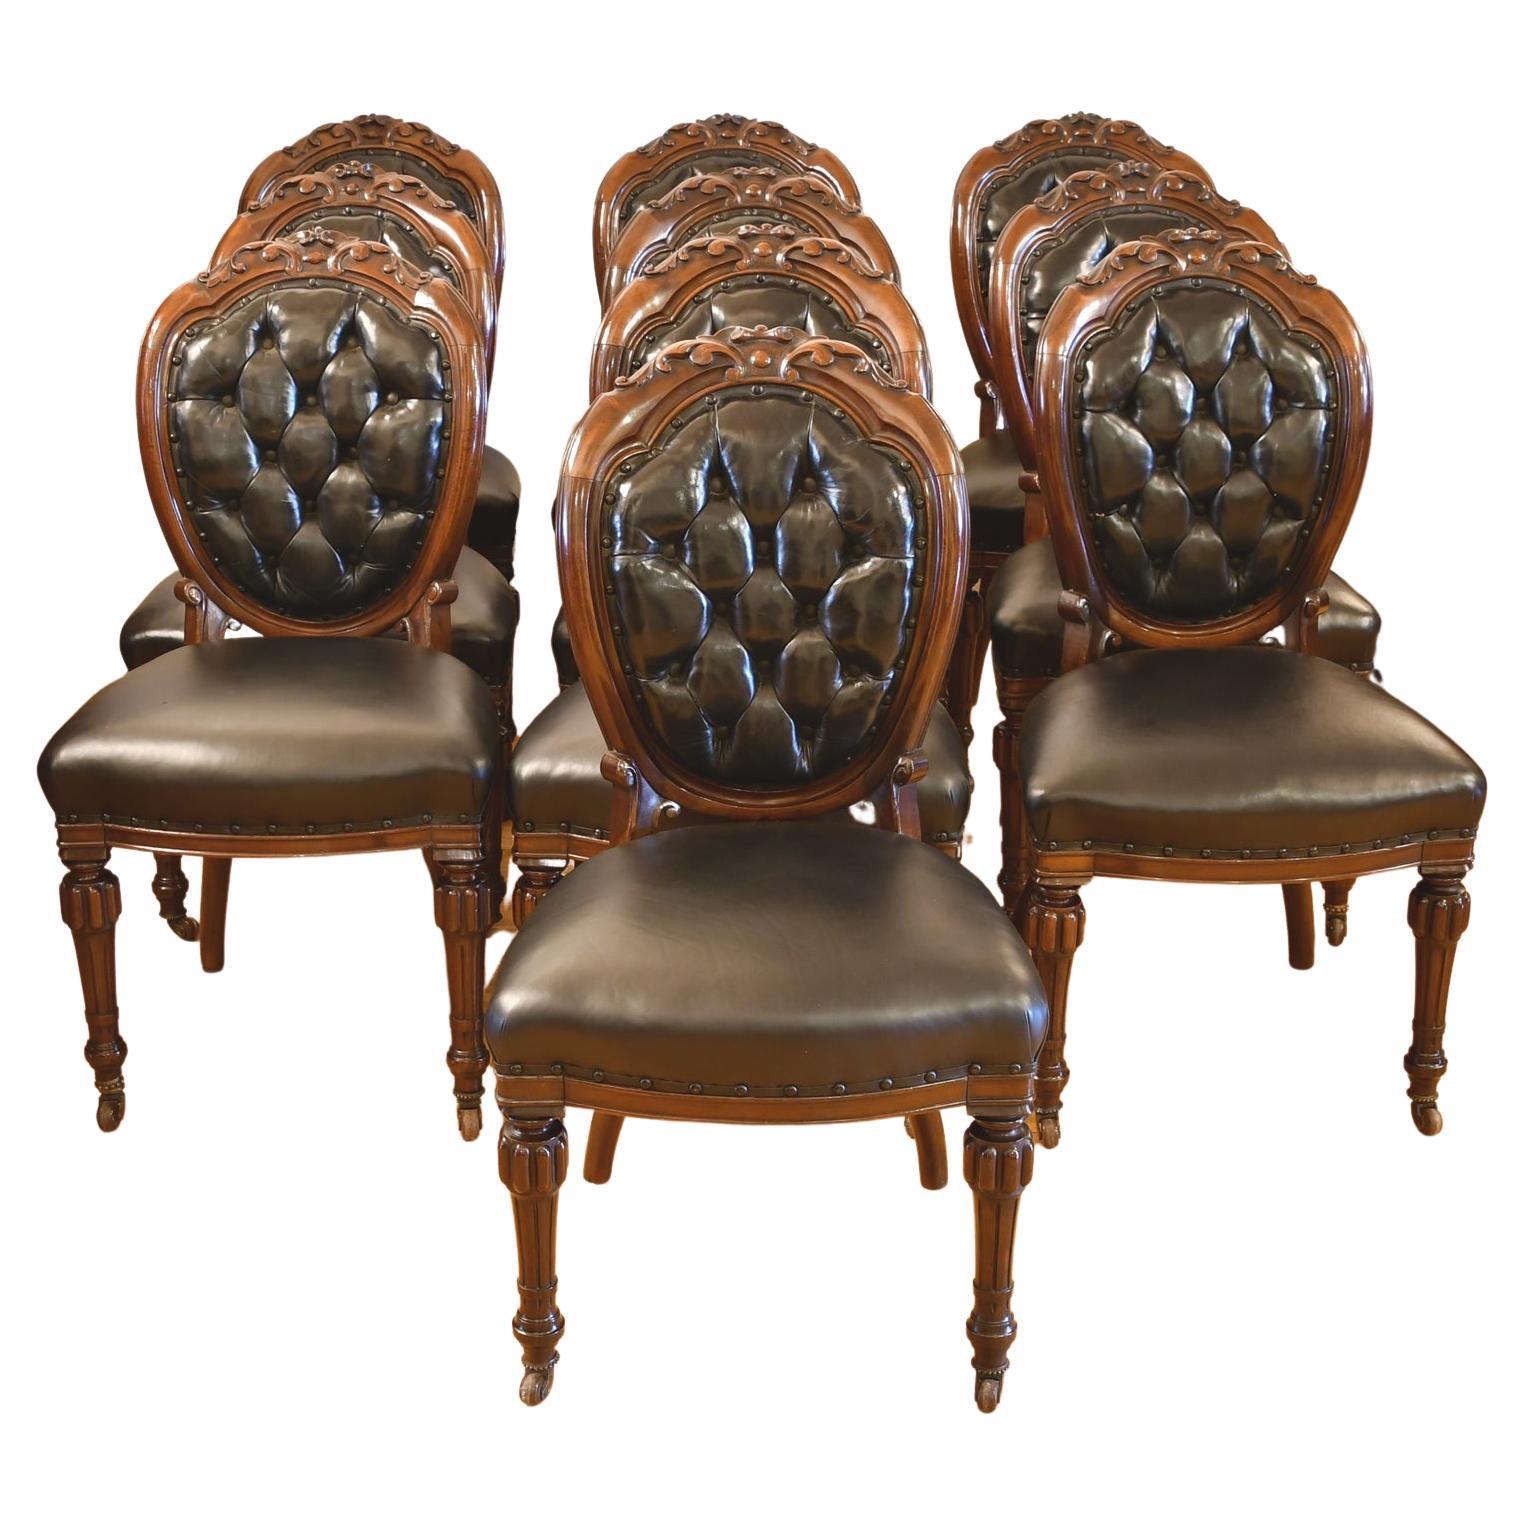 Set of 10 Antique English Victorian Dining Chairs with Black Tufted Leather